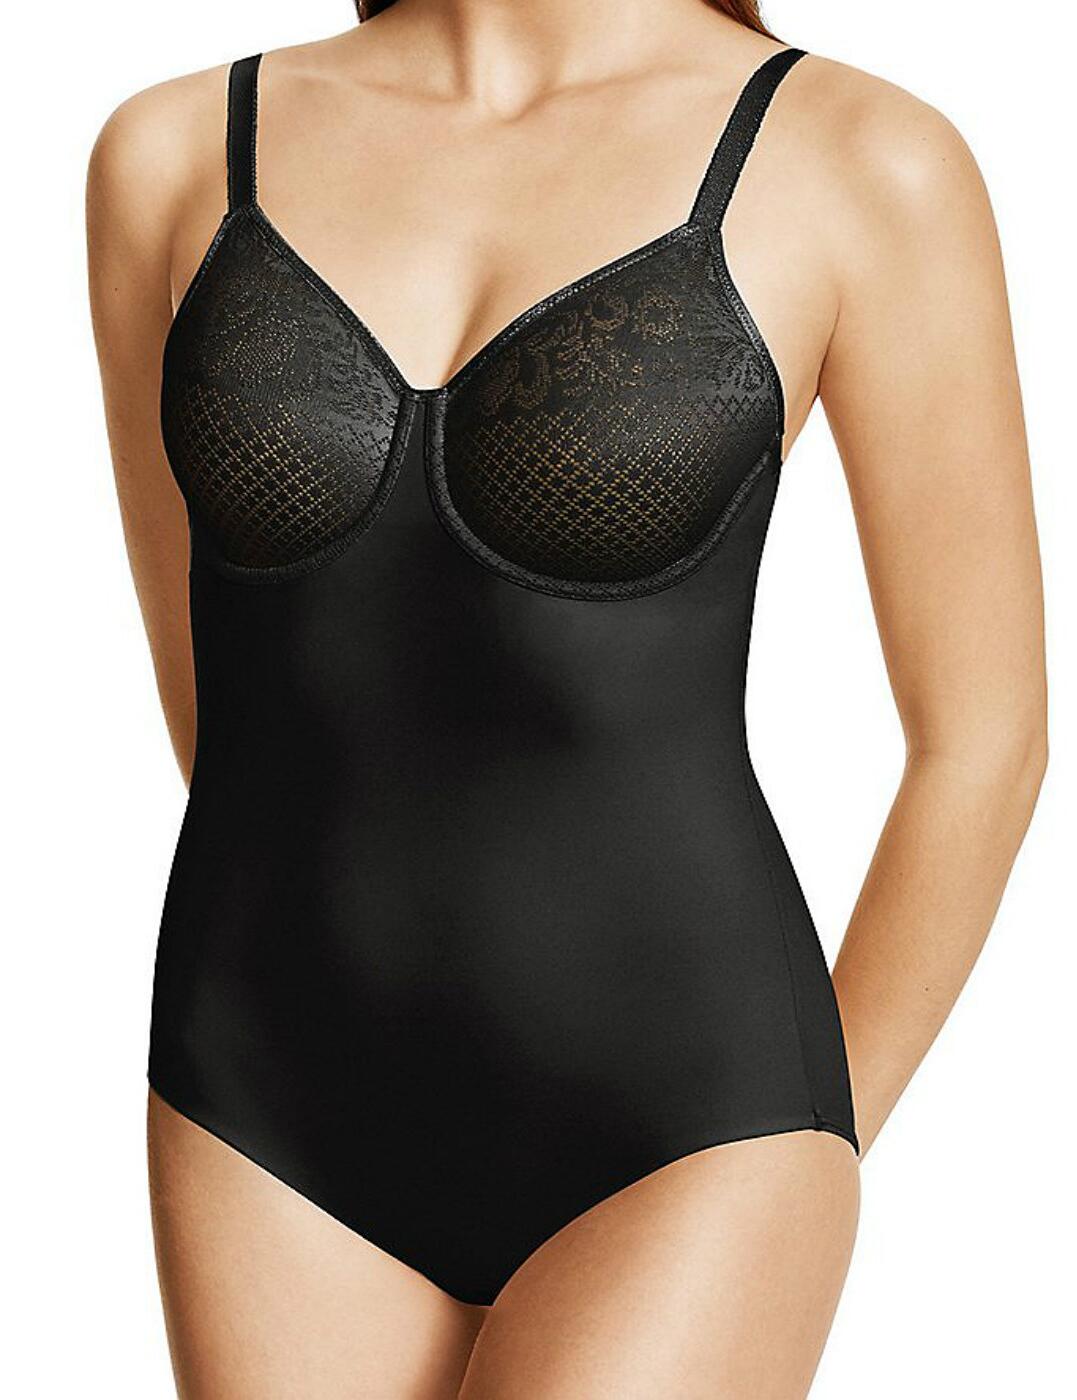 801210 Wacoal Visual Effects Body Briefer - 801210 Black